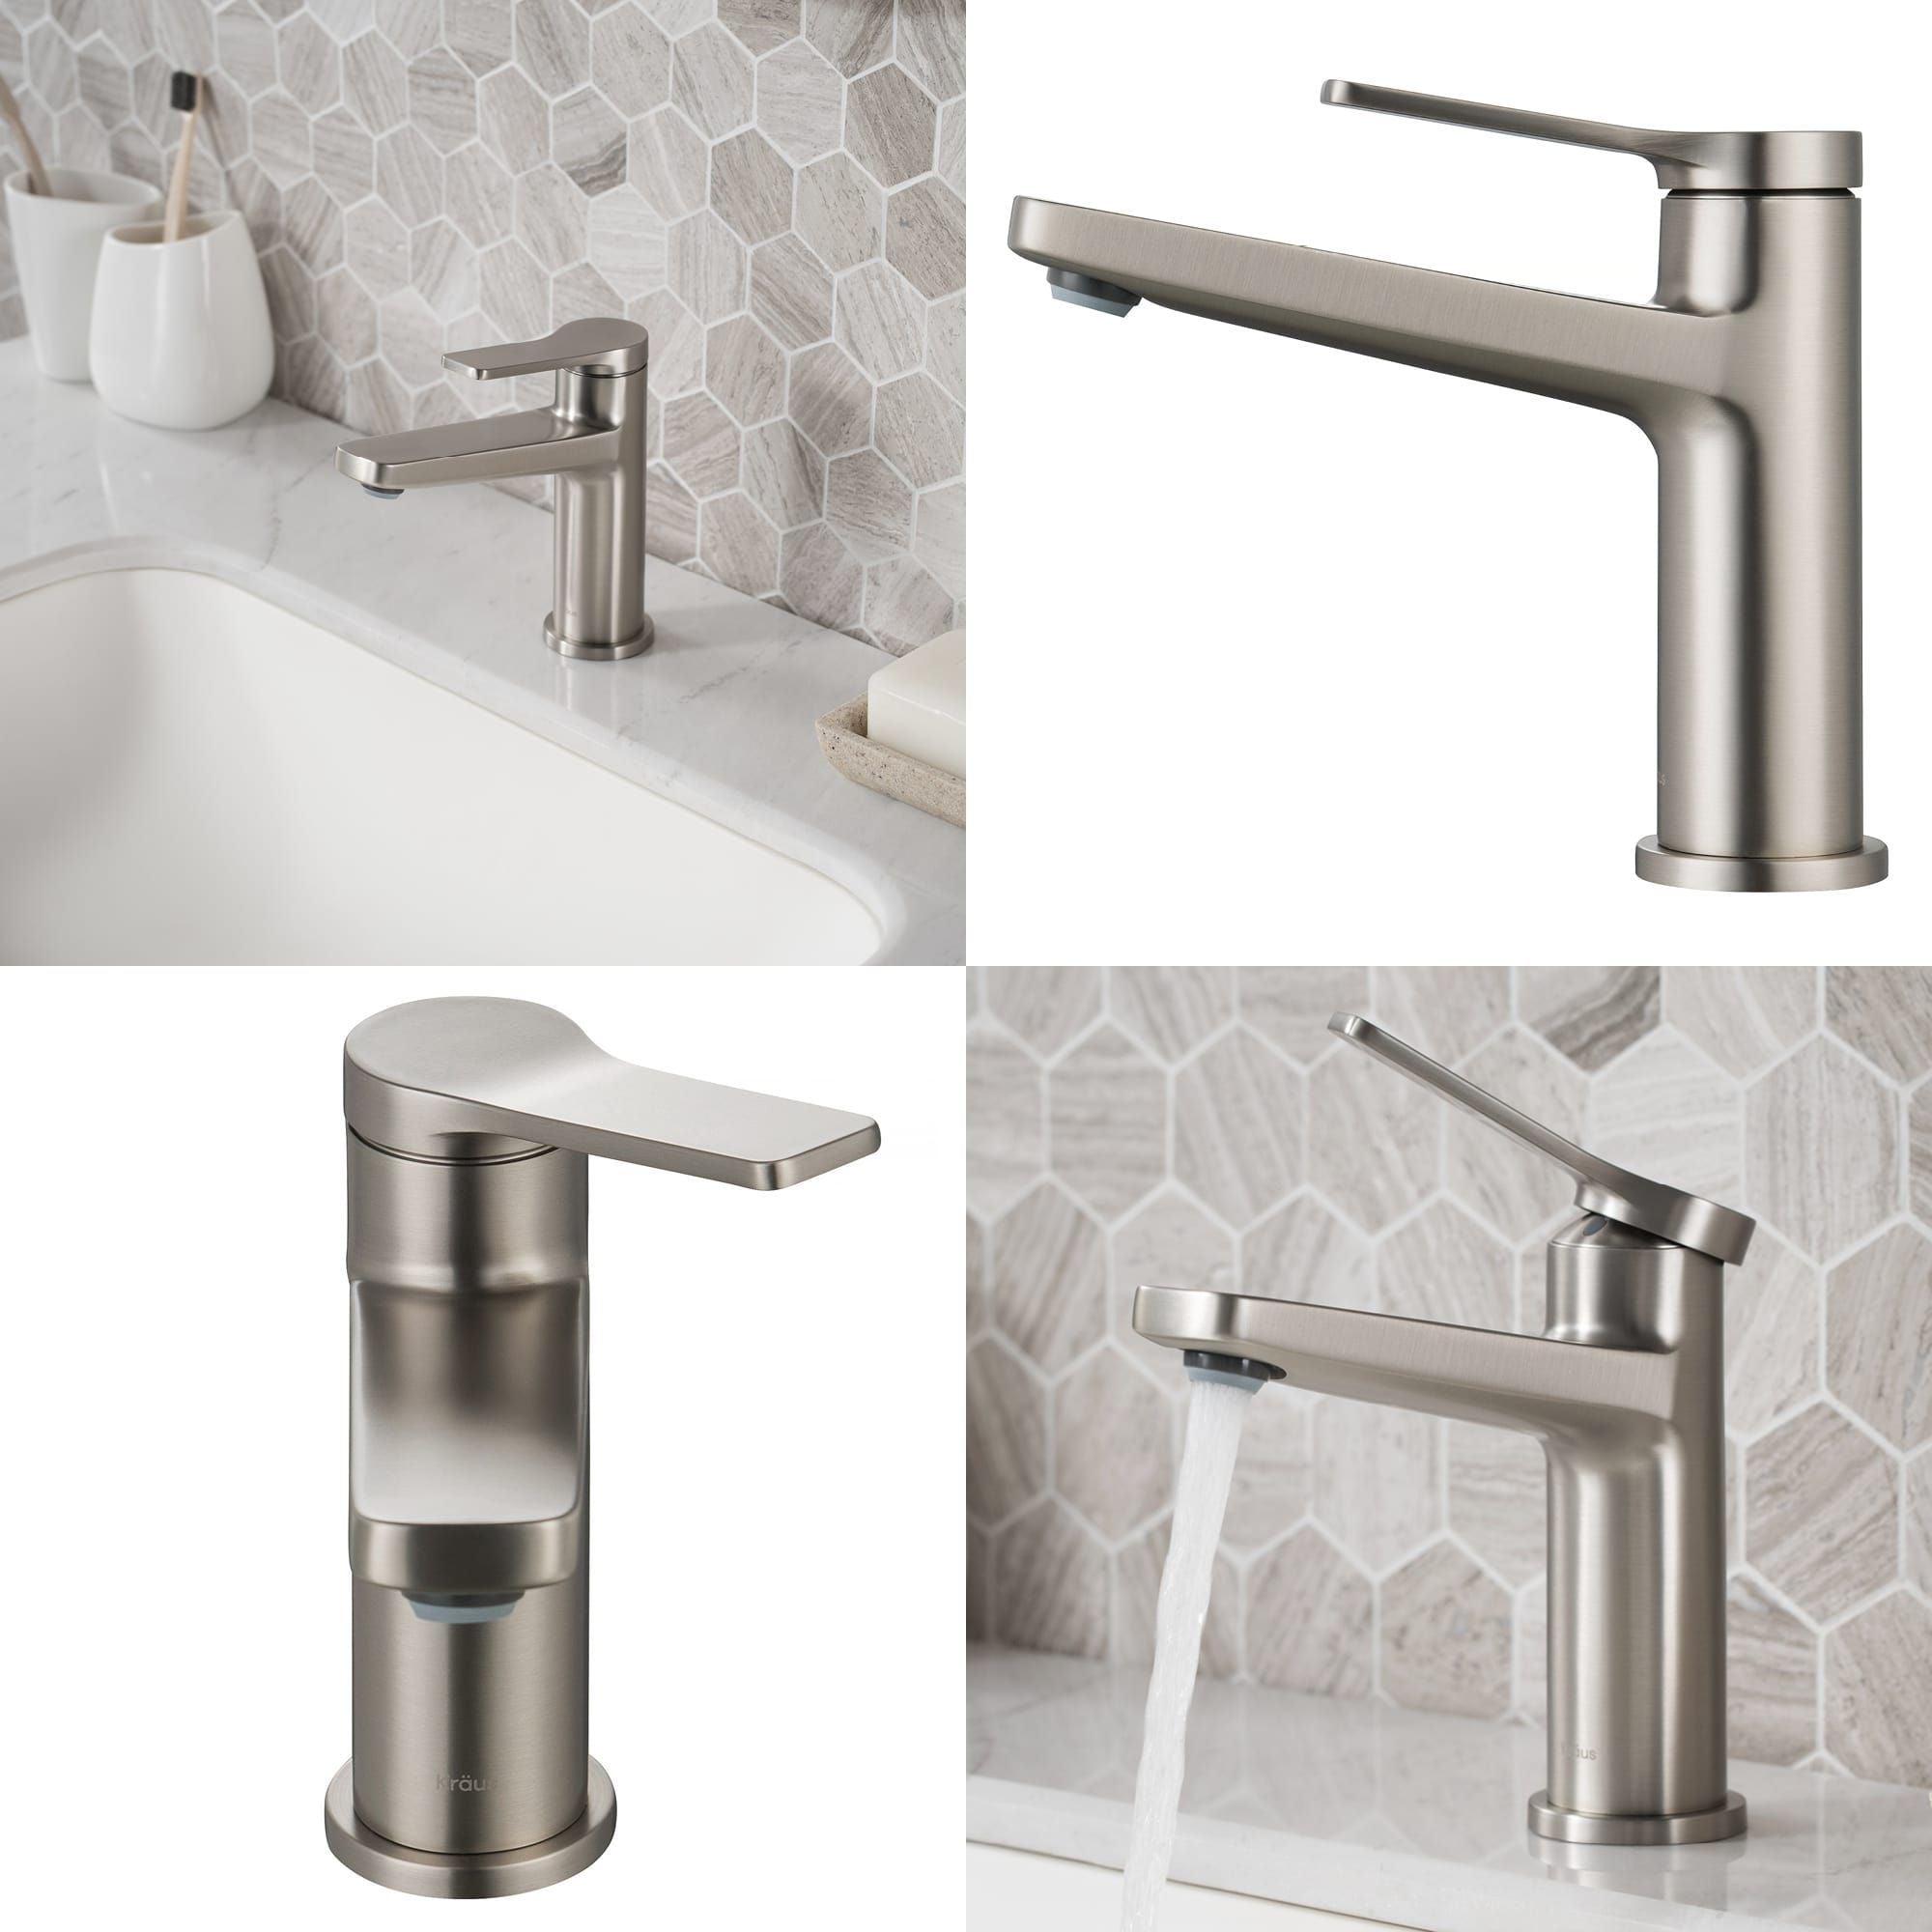 KRAUS Indy Single Handle Bathroom Faucet with Matching Pop-Up Drain in Spot Free Stainless Steel/Satin Nickel KBF-1401SFS-PU-11SN | DirectSinks